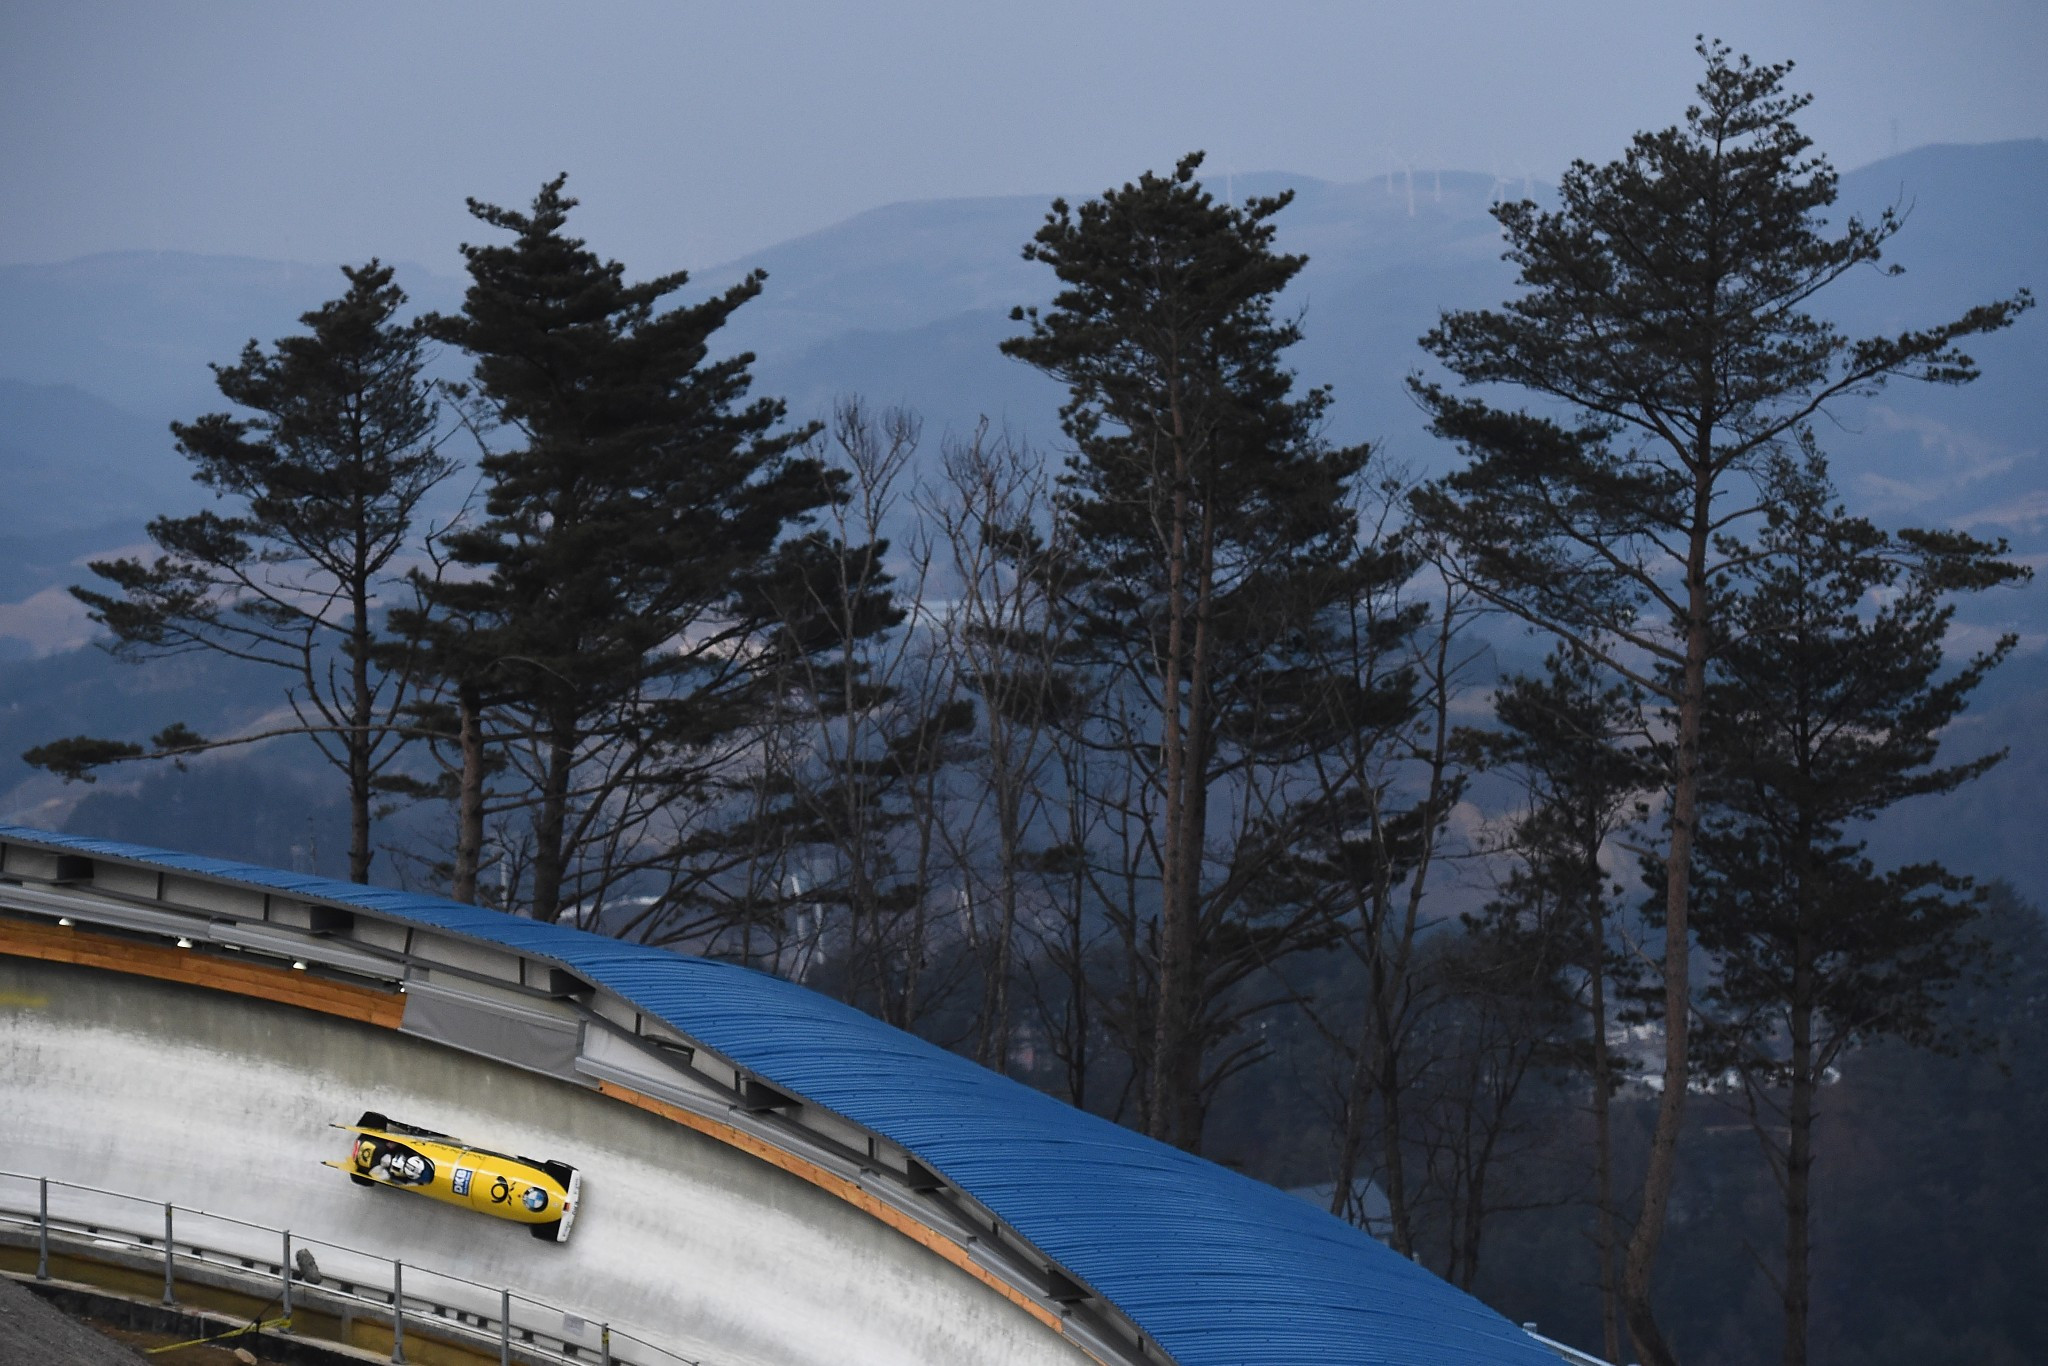 Luge will be held at the Alpensia Sliding Centre at Pyeongchang 2018 ©Getty Images